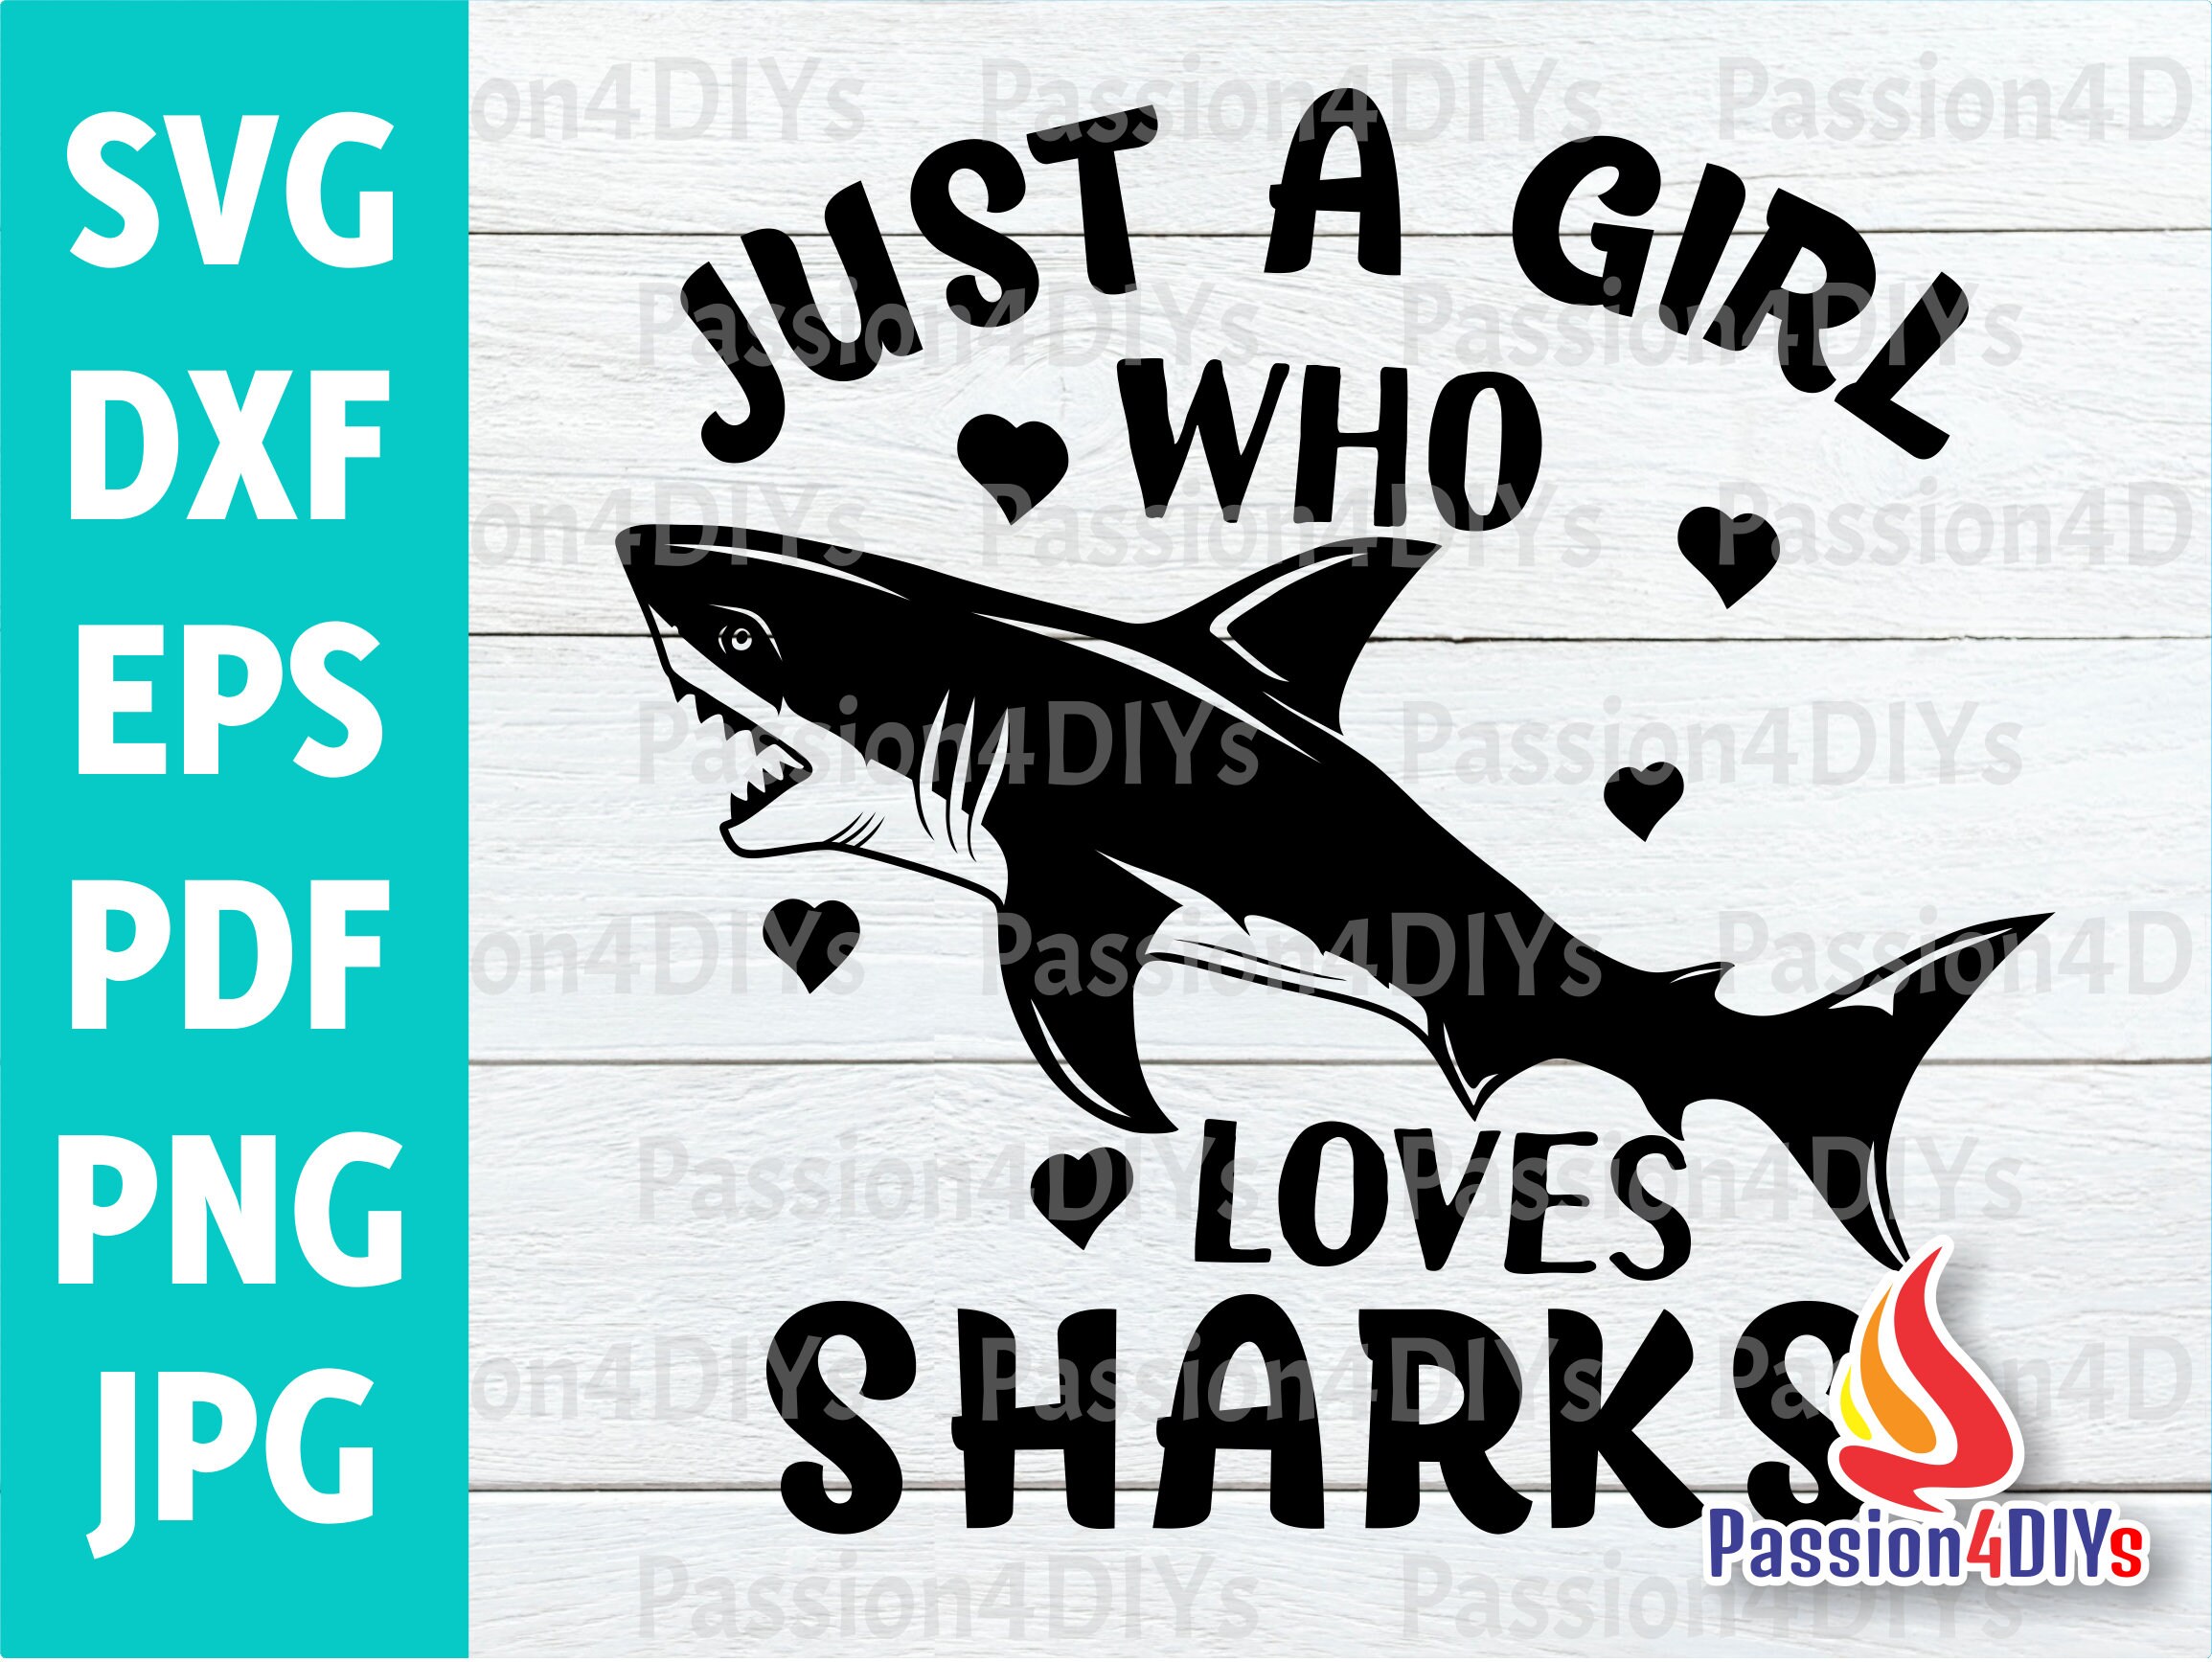 DesignEclipse Girl Who Loves Sharks Shirt * Beach Party Ocean Life Summer Vacation Gift Tshirt